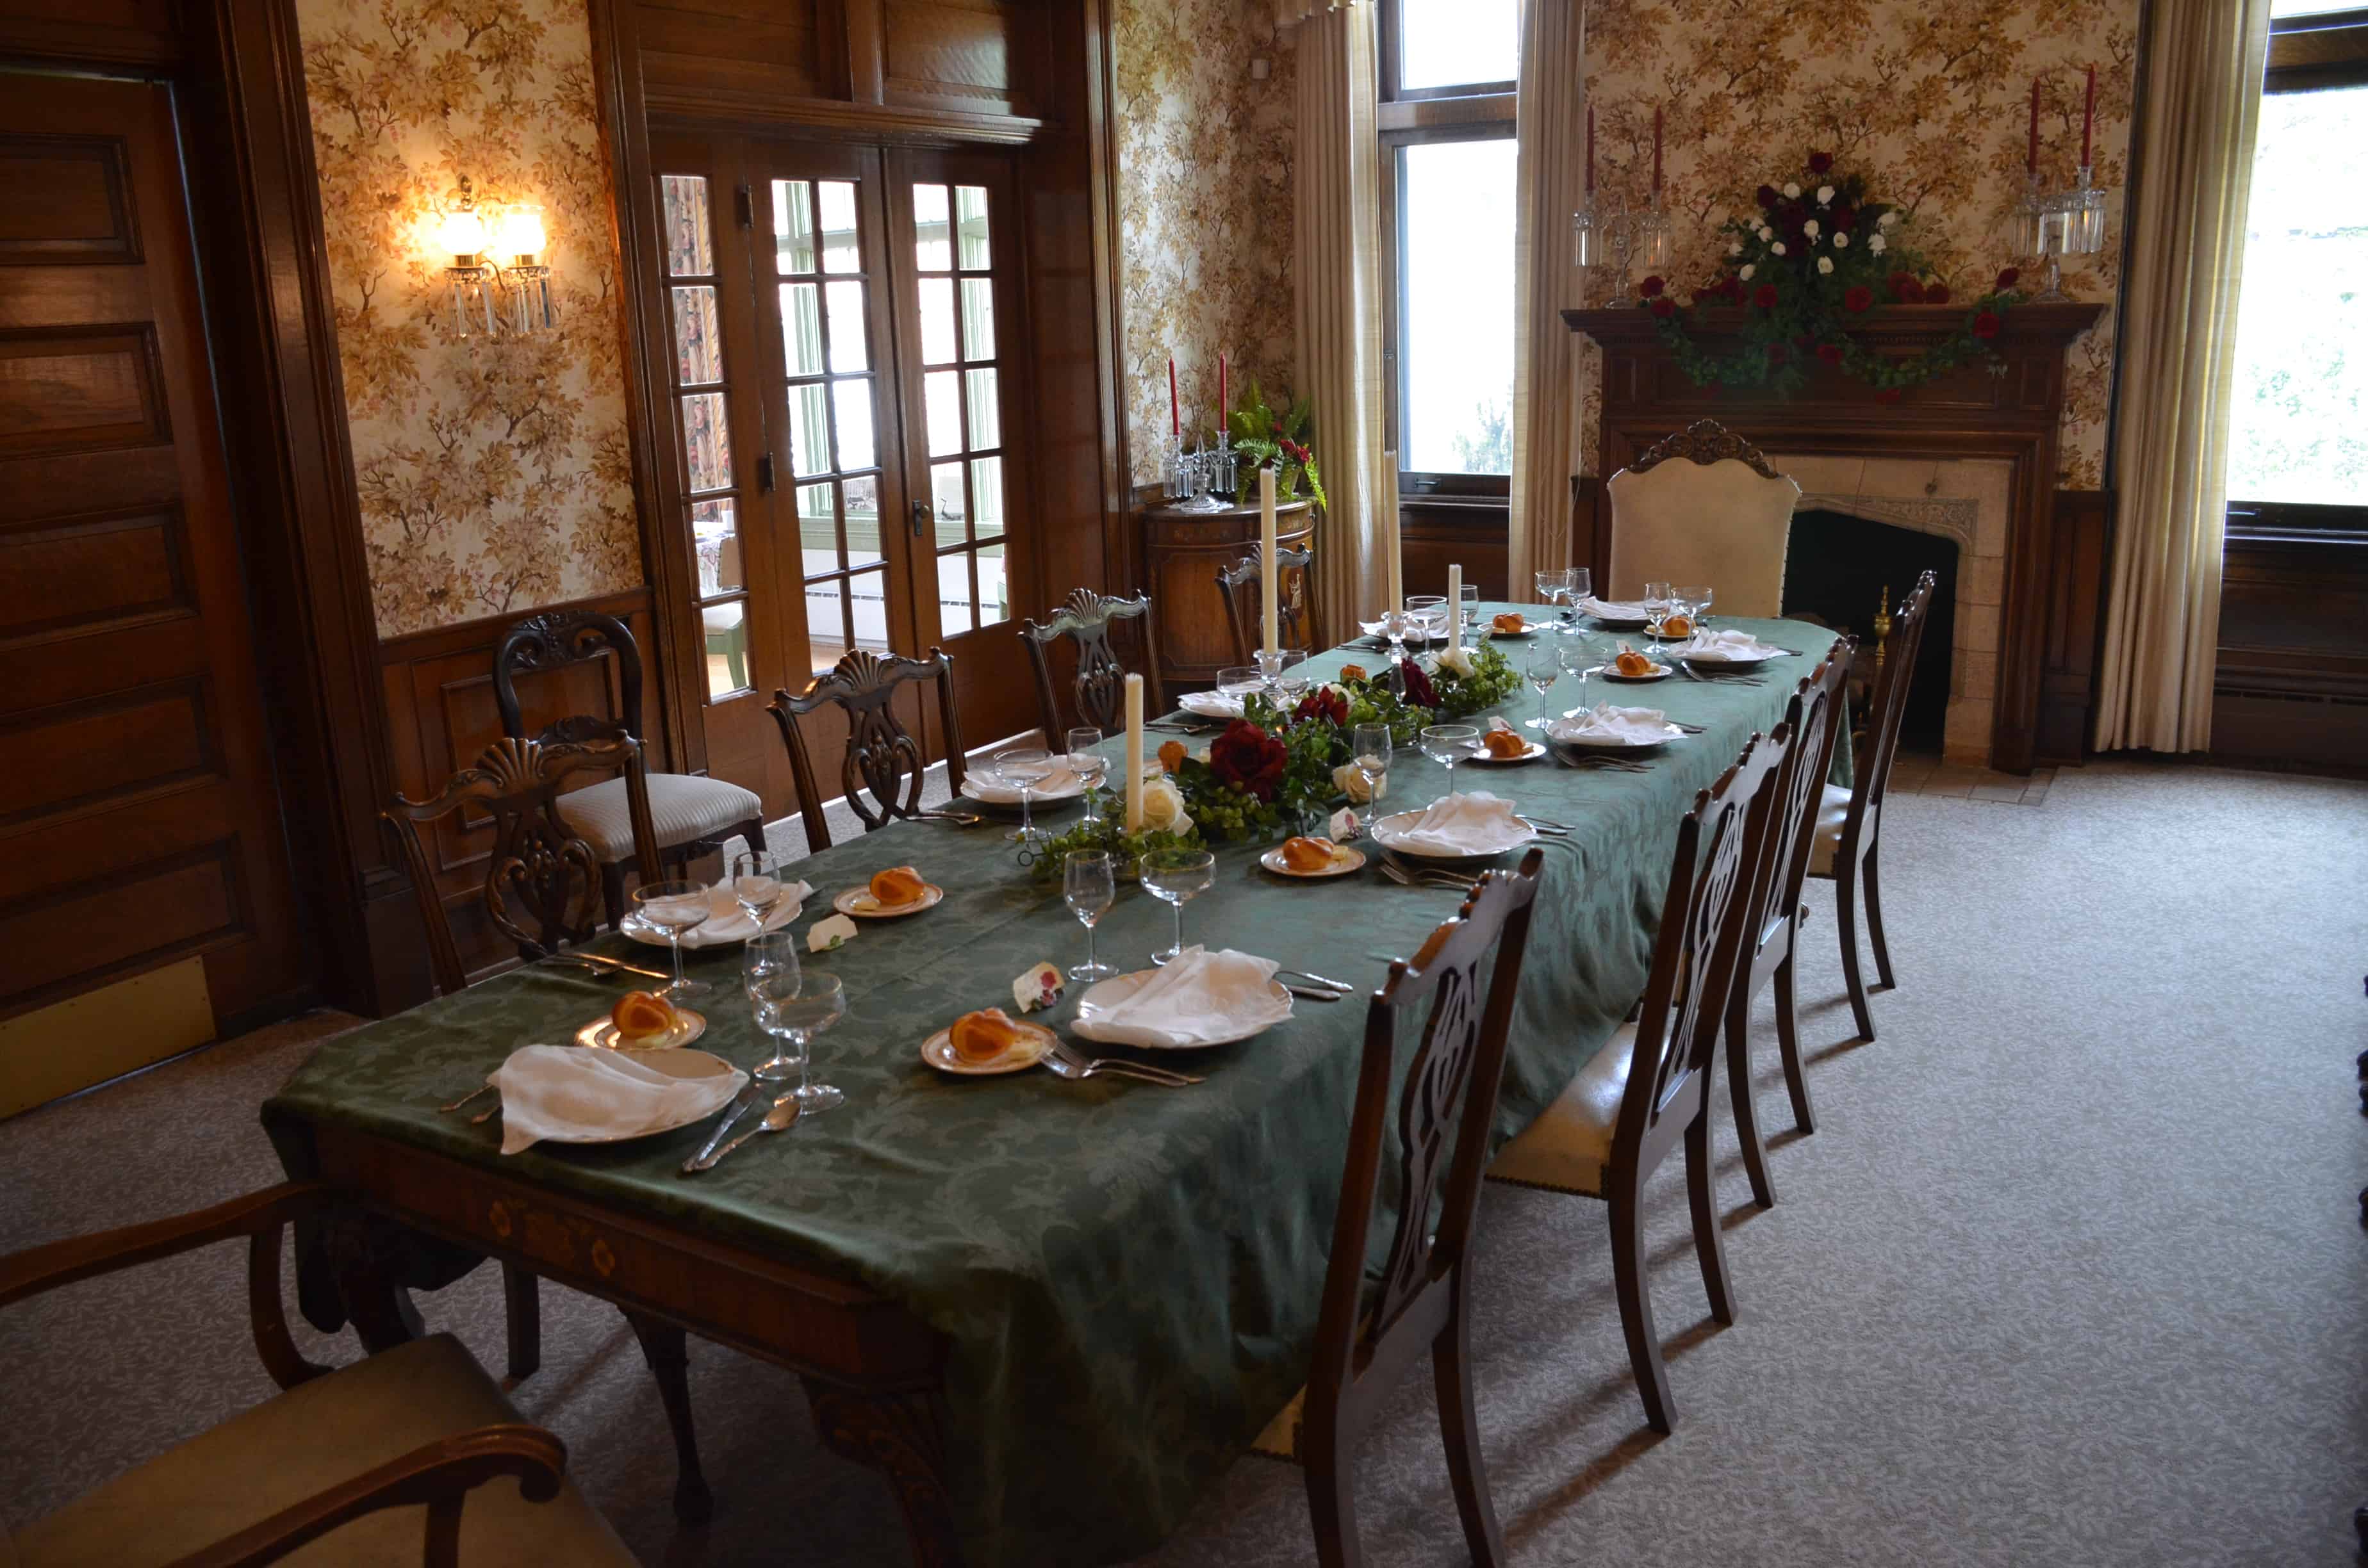 Dining room in the Wyoming Governor's Mansion in Cheyenne